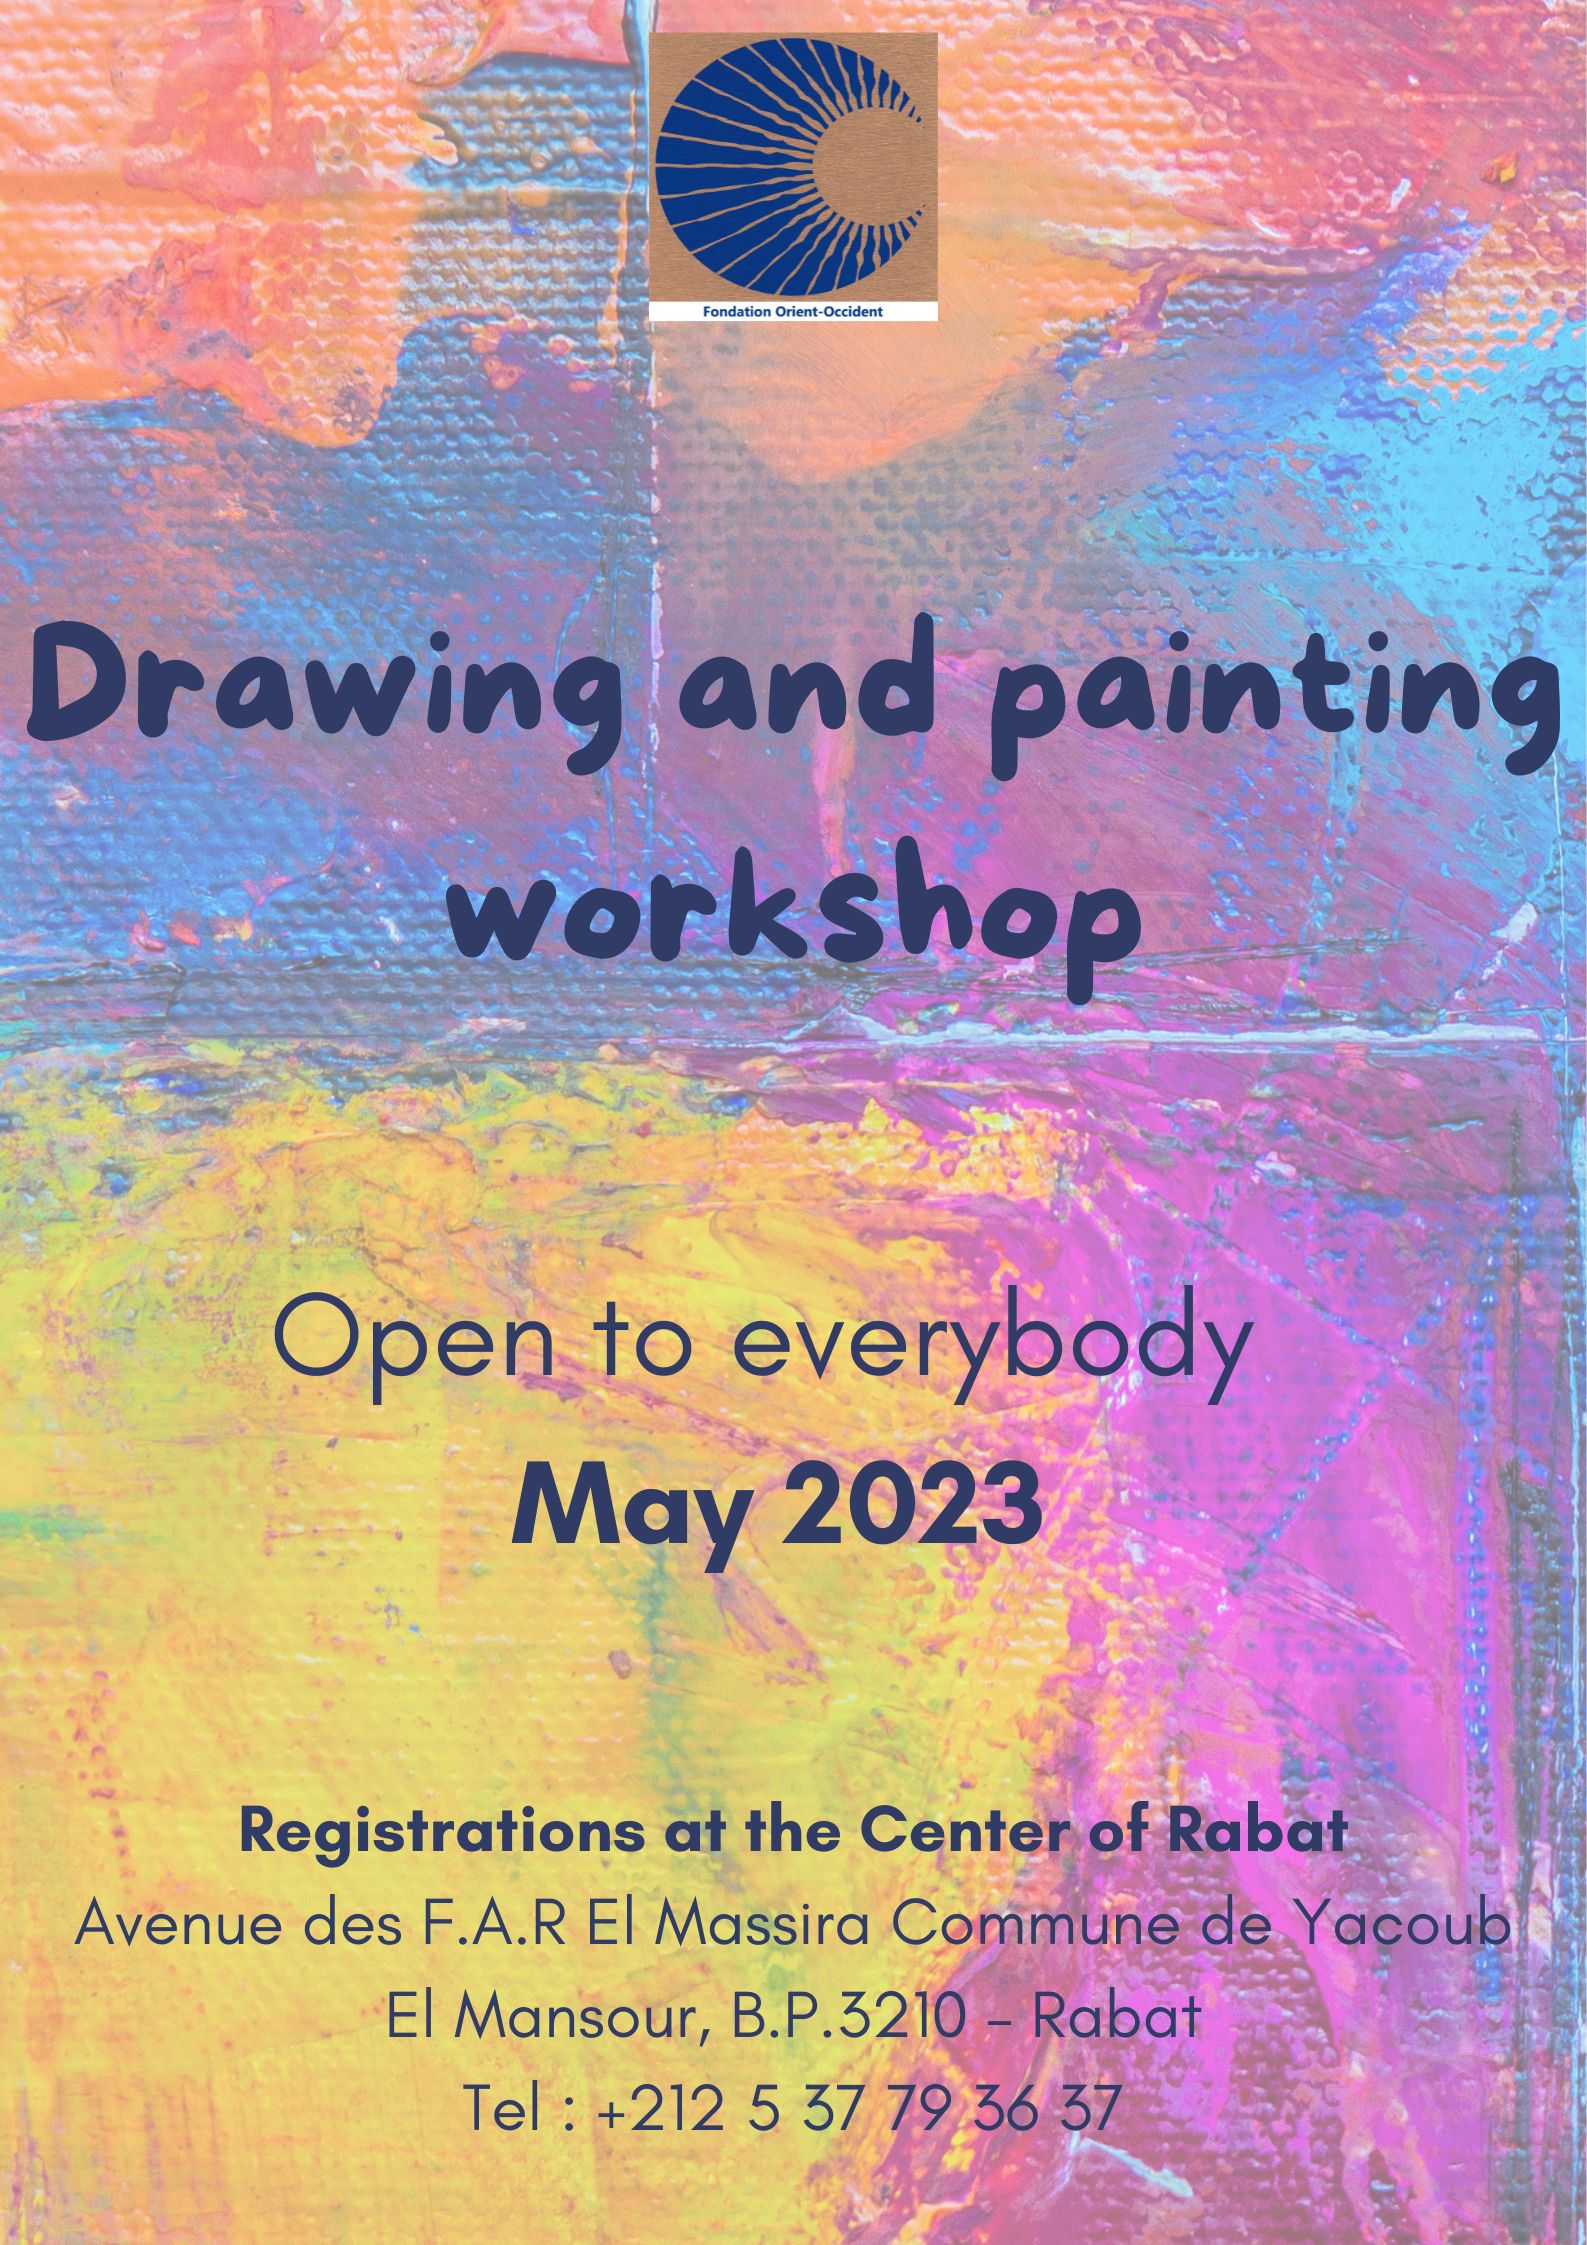 Drawing and painting workshop